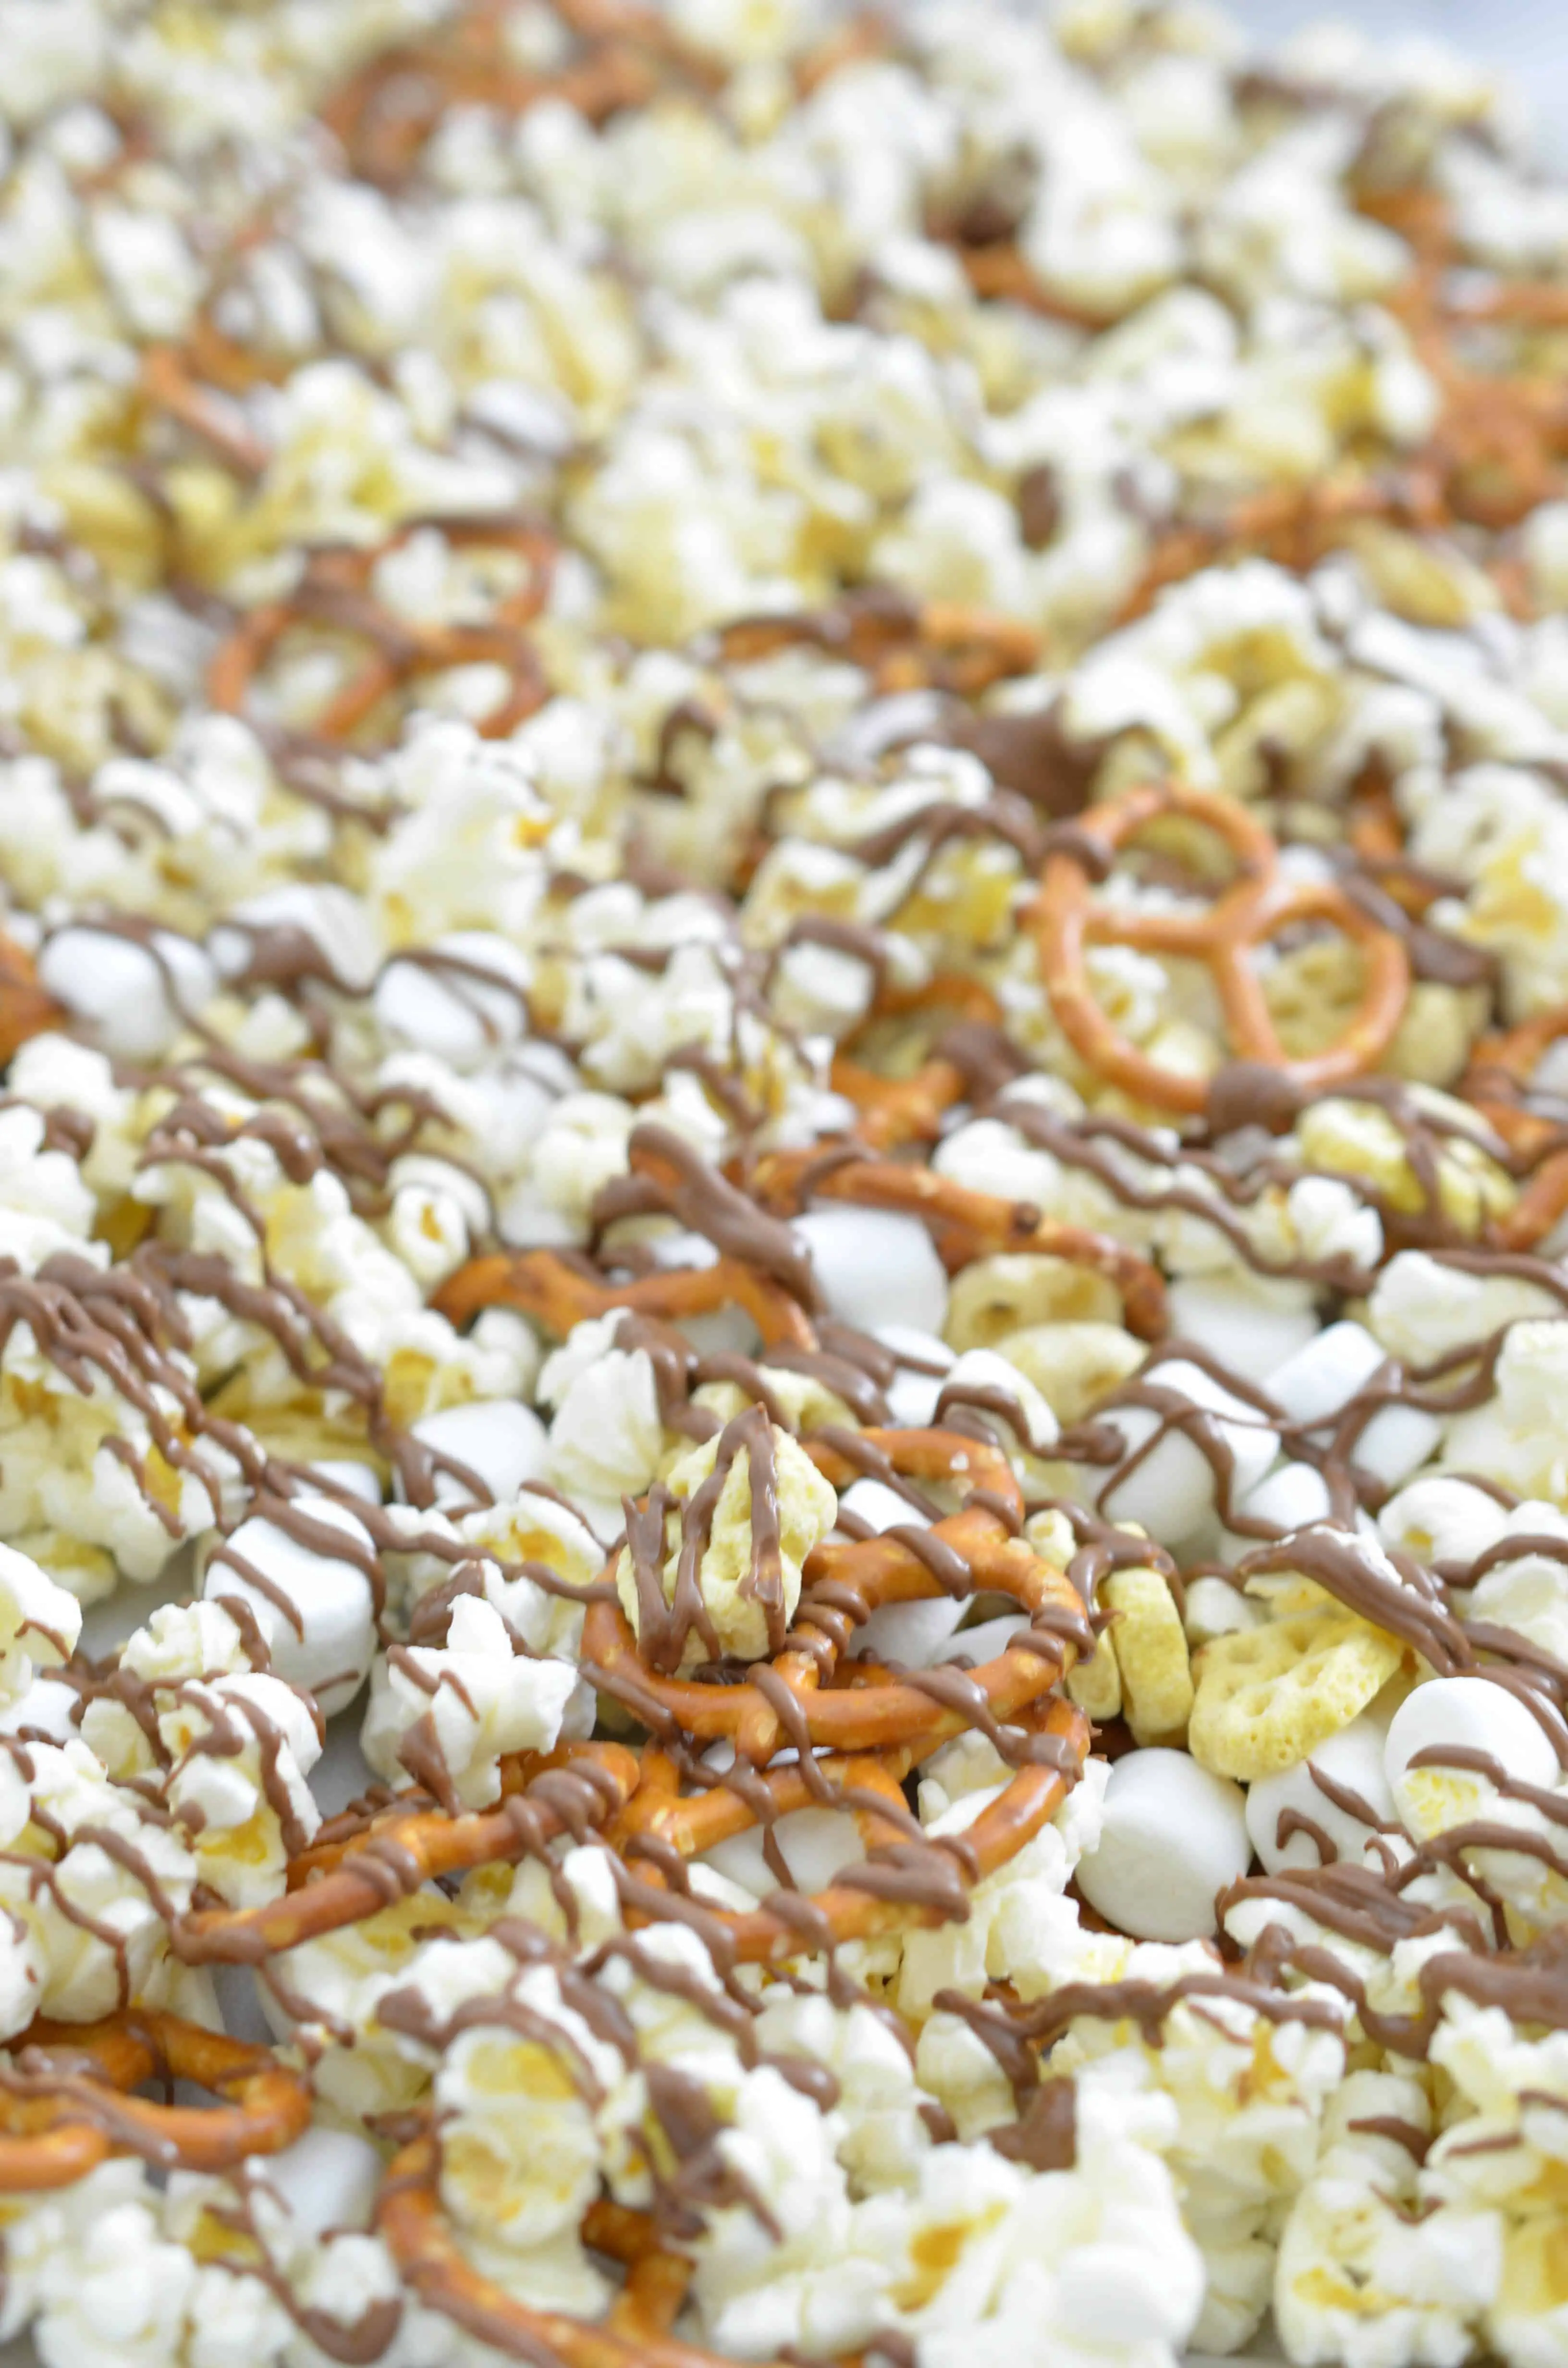 This snack mix recipe is made with a family favorite, Honeycomb cereal. This mix includes pretzels, popcorn, marshmallows, and is topped with a milk chocolate drizzle. A treat all kids will enjoy.